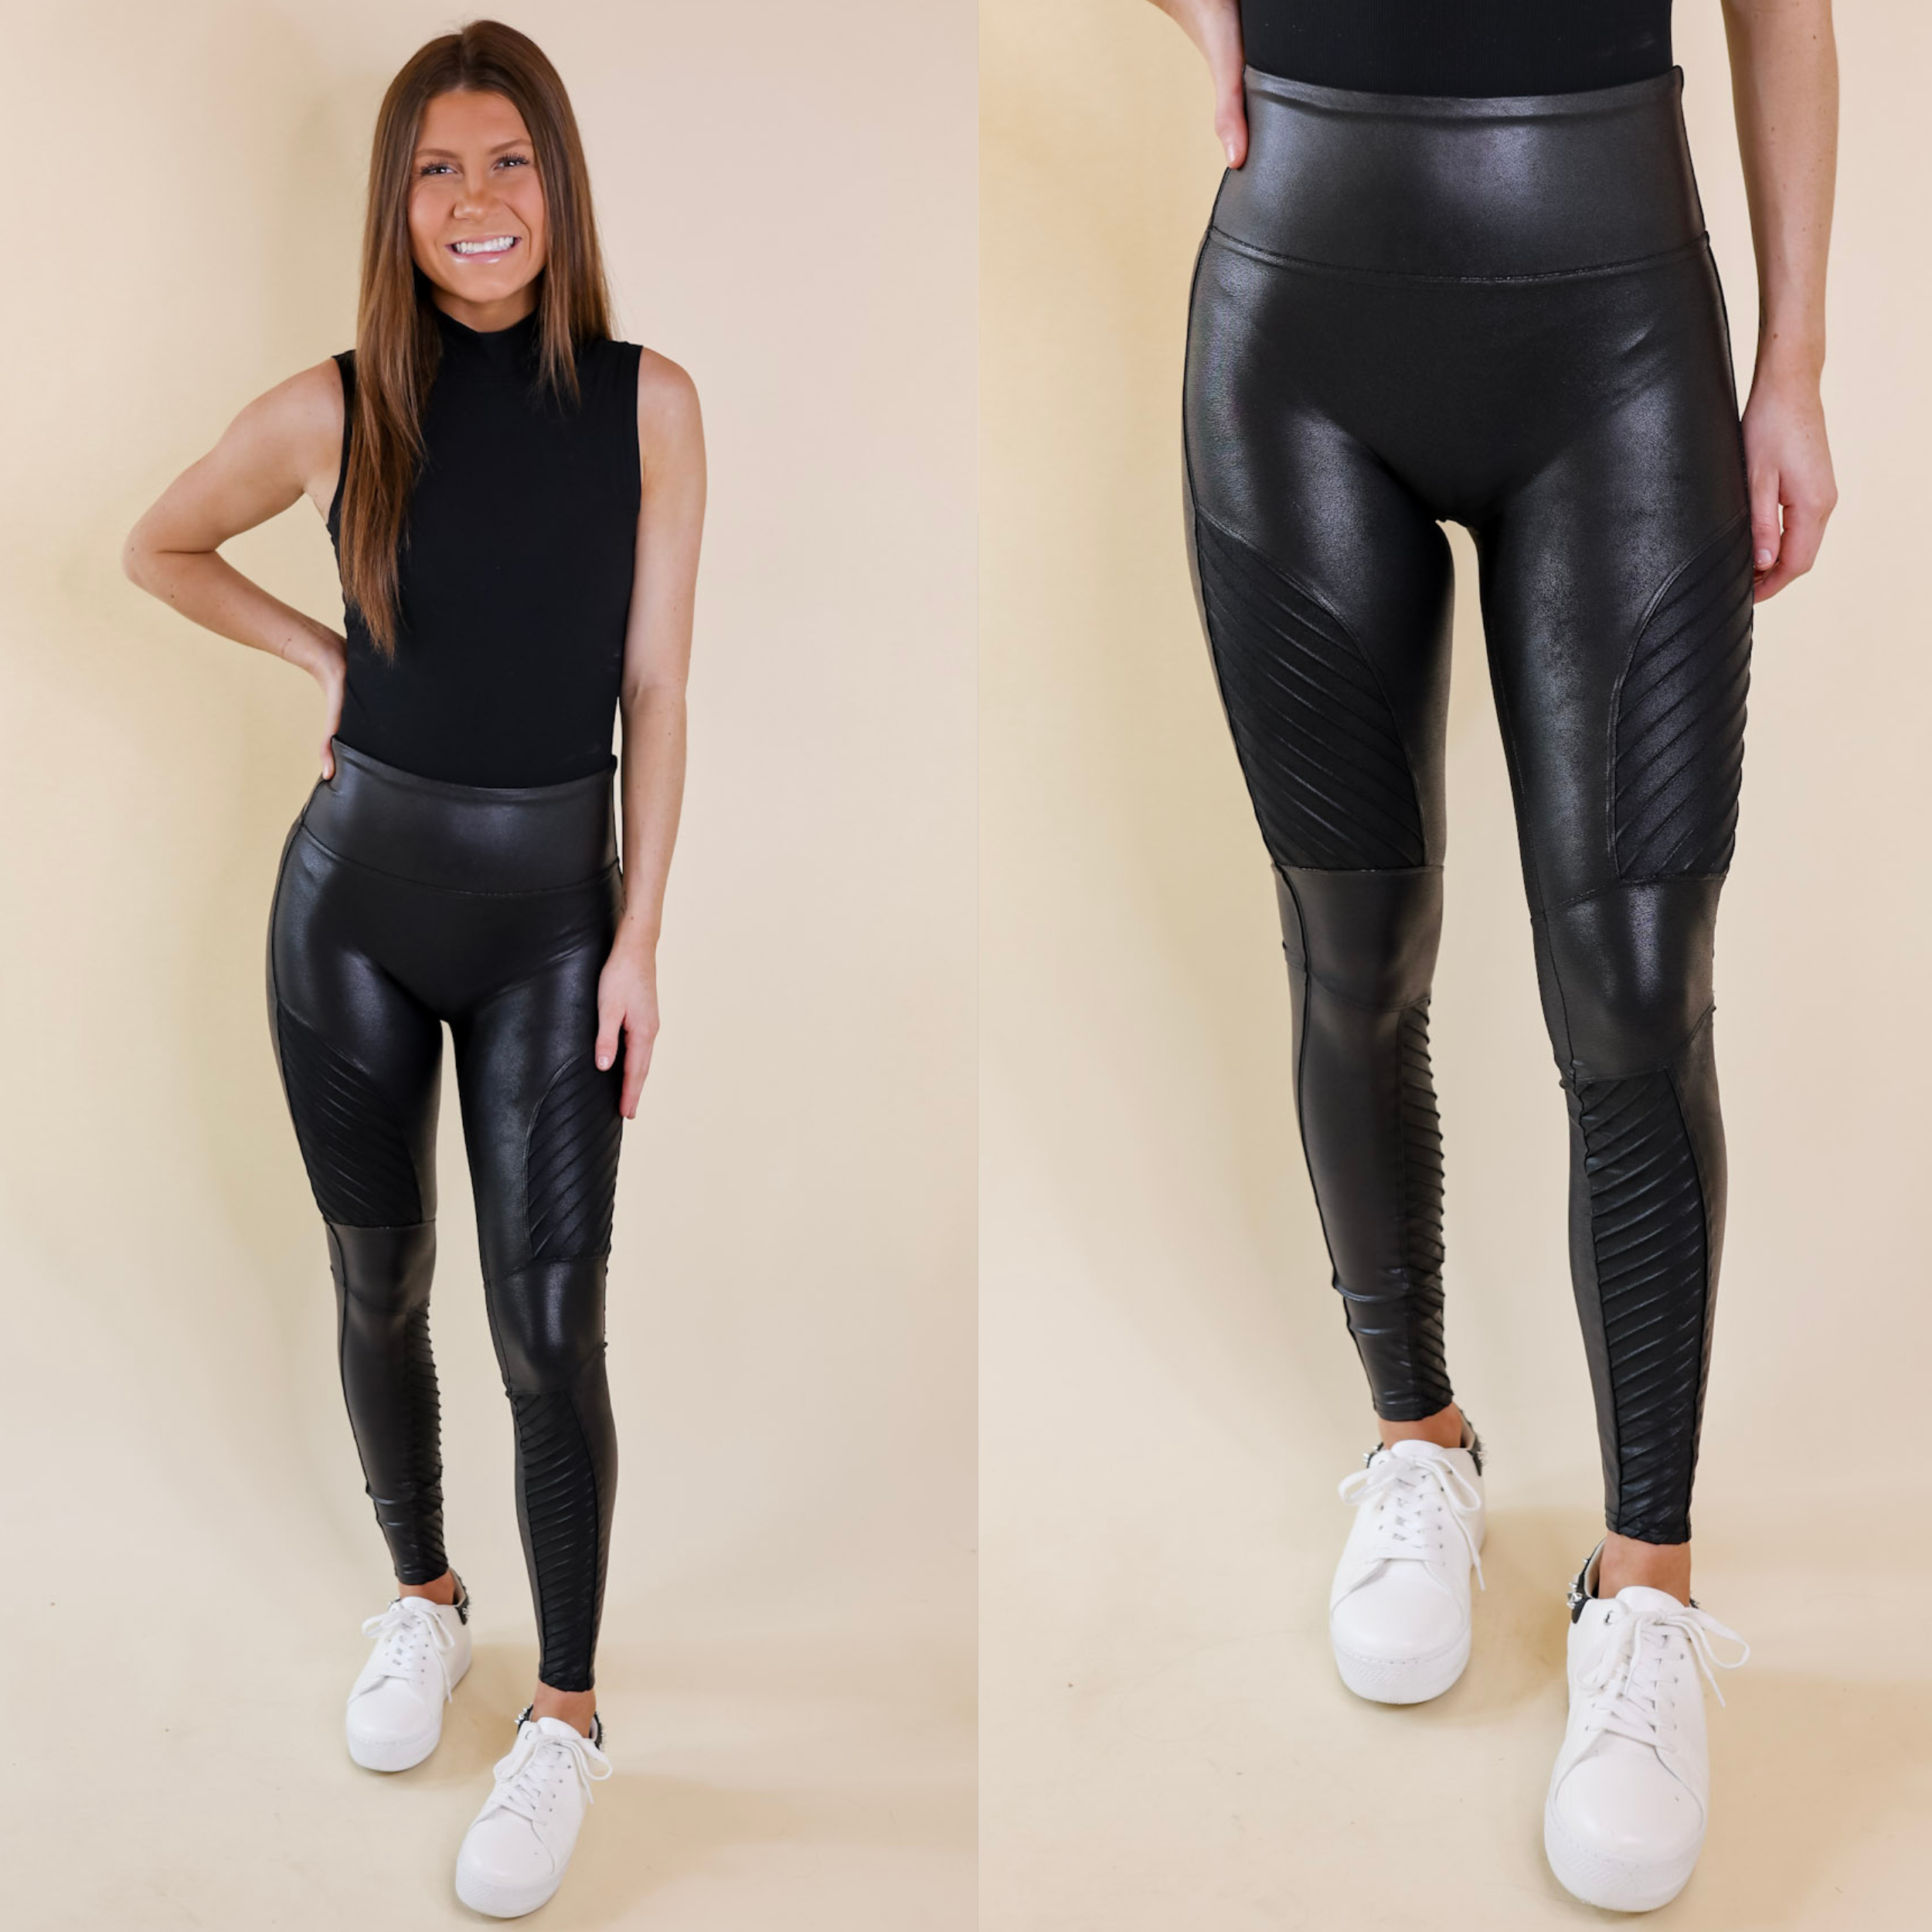 Spanx vs Aerie crackle leggings review - Here For It All blog